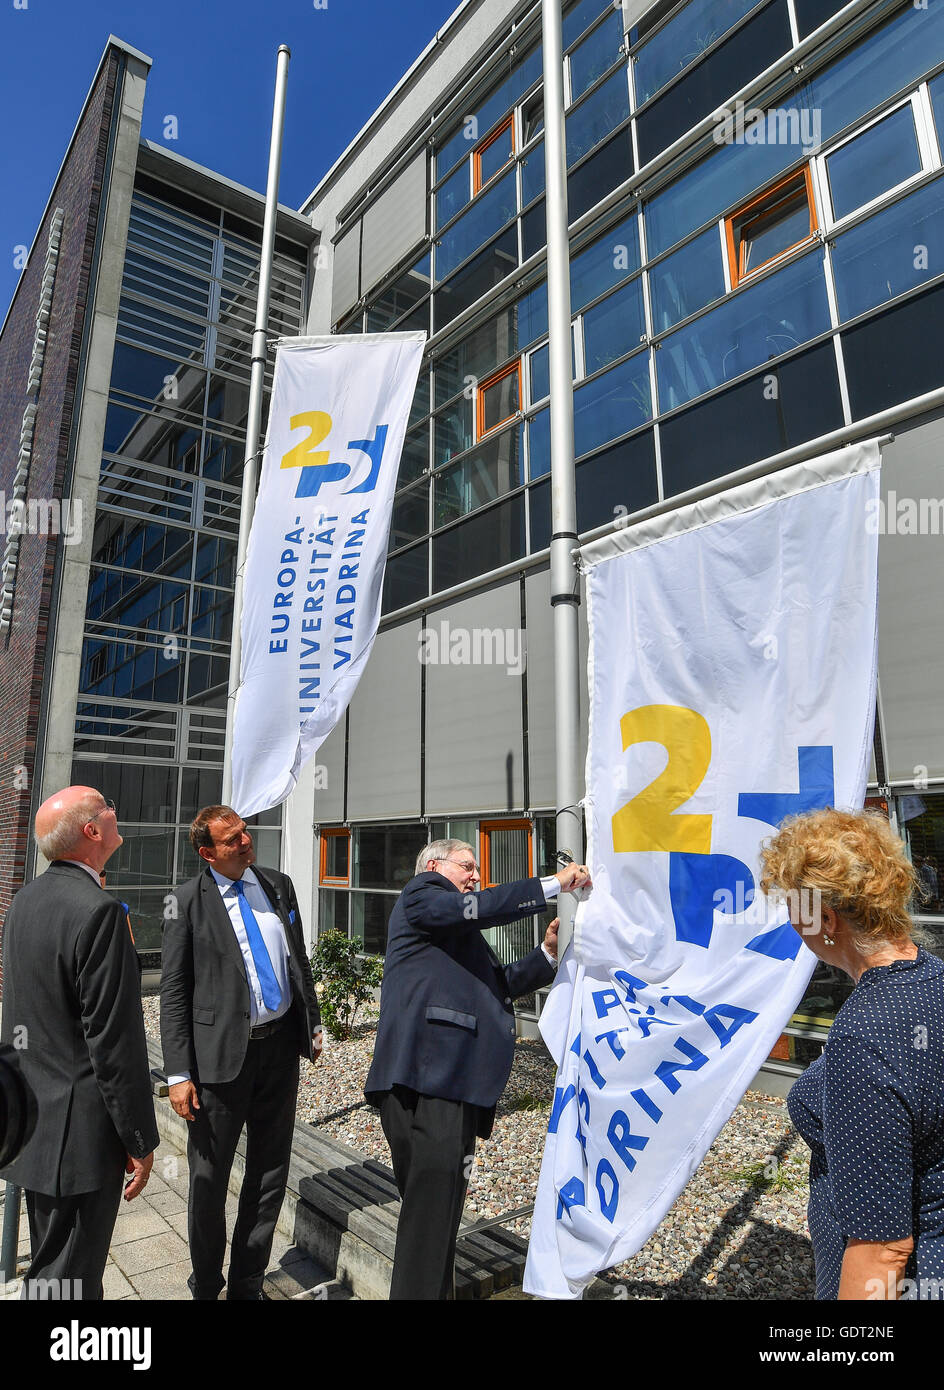 Alexander Woell (2-L), president of the Viadrina European University, raises a flag with other former rectors and presidents of the university, Hans N. Weiler (2-R), Gesine Schwan (R) and Gunter Pleuger (L) to mark the 25th anniversary of the university in Frankfurt/Oder, Germany, 21 July 2016. A ceremonial act marking the 25th anniversary of the Viadrina European University was held on the same day. Photo: PATRICK PLEUL/dpa Stock Photo